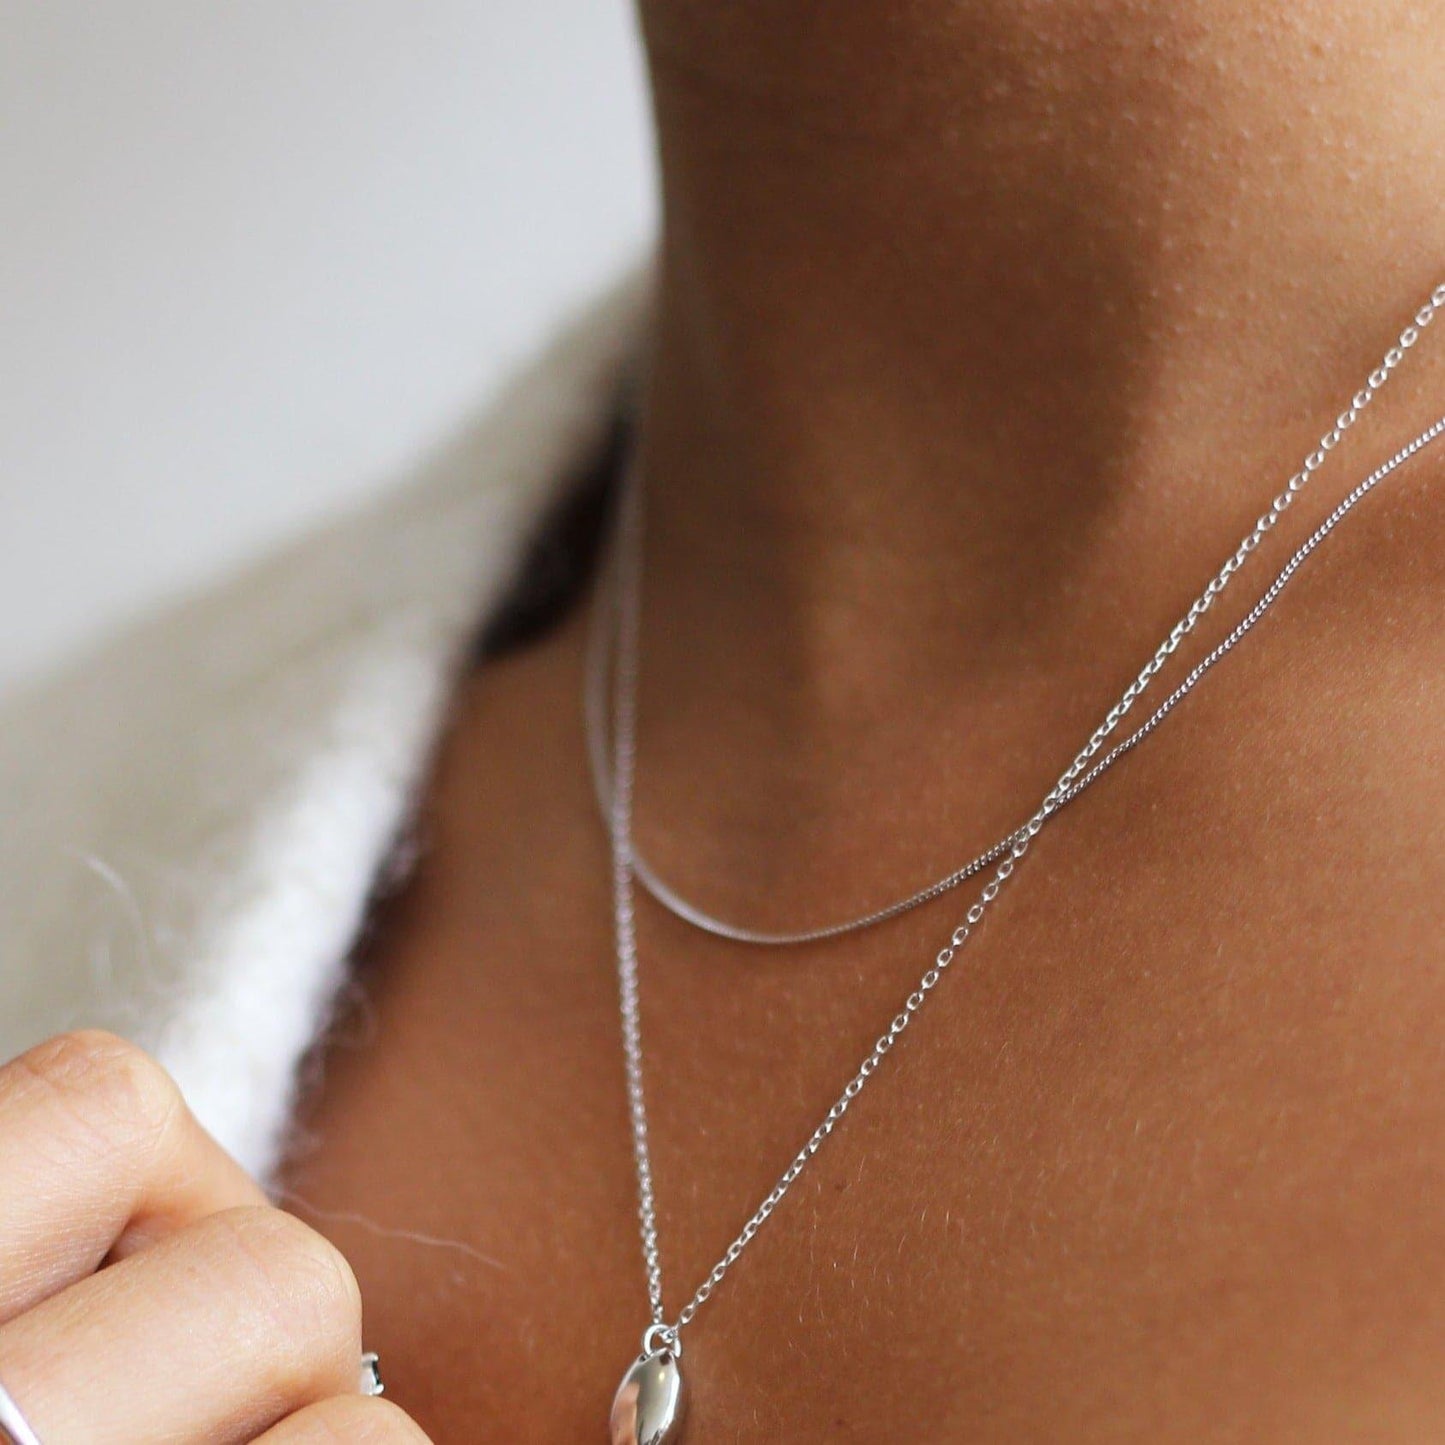 THE GIGI NECKLACE - Solid white gold